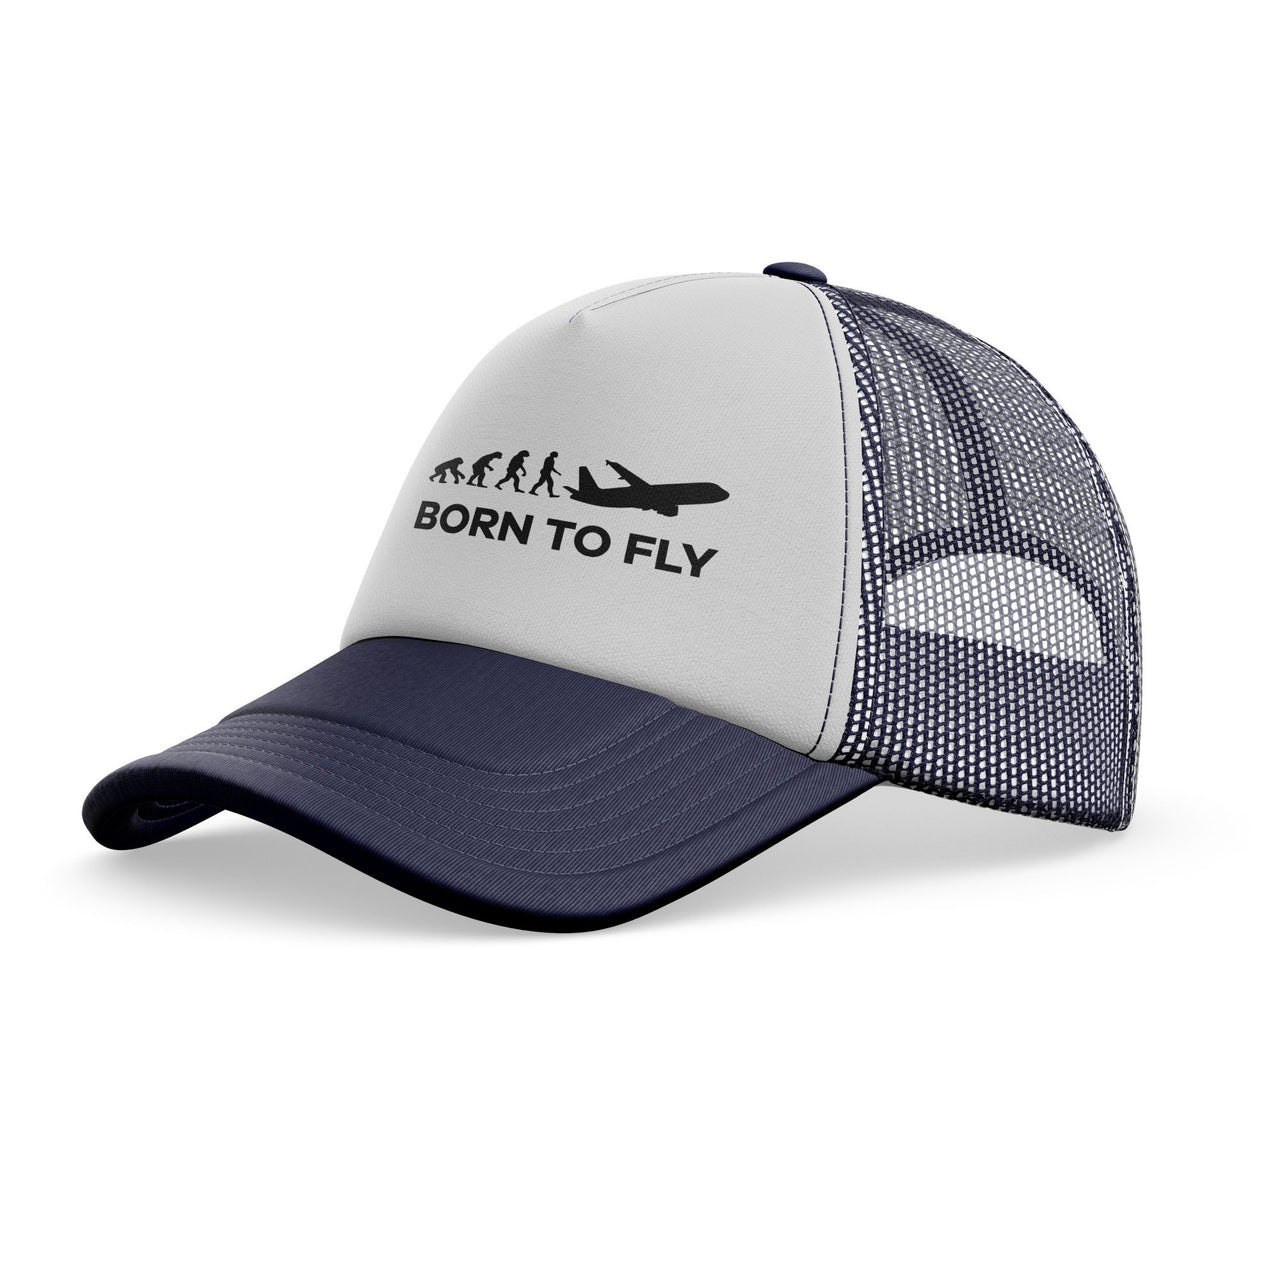 Born To Fly Designed Trucker Caps & Hats